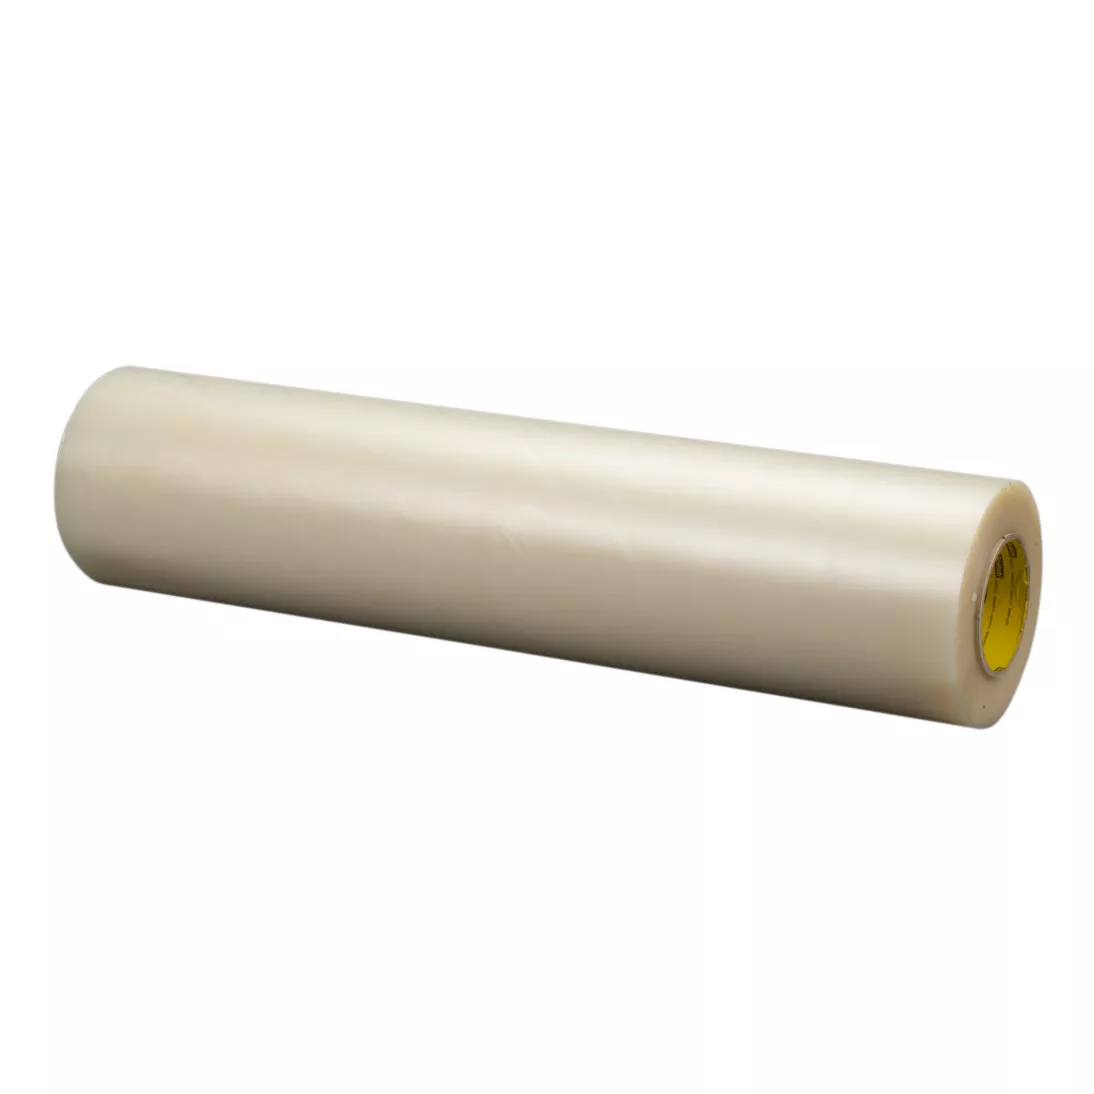 3M™ Thin Flexographic Plate Mounting Tape 2205FL, Translucent, 27 in x
60 yd, 5 mil, 1 roll per case, 3 inch Core